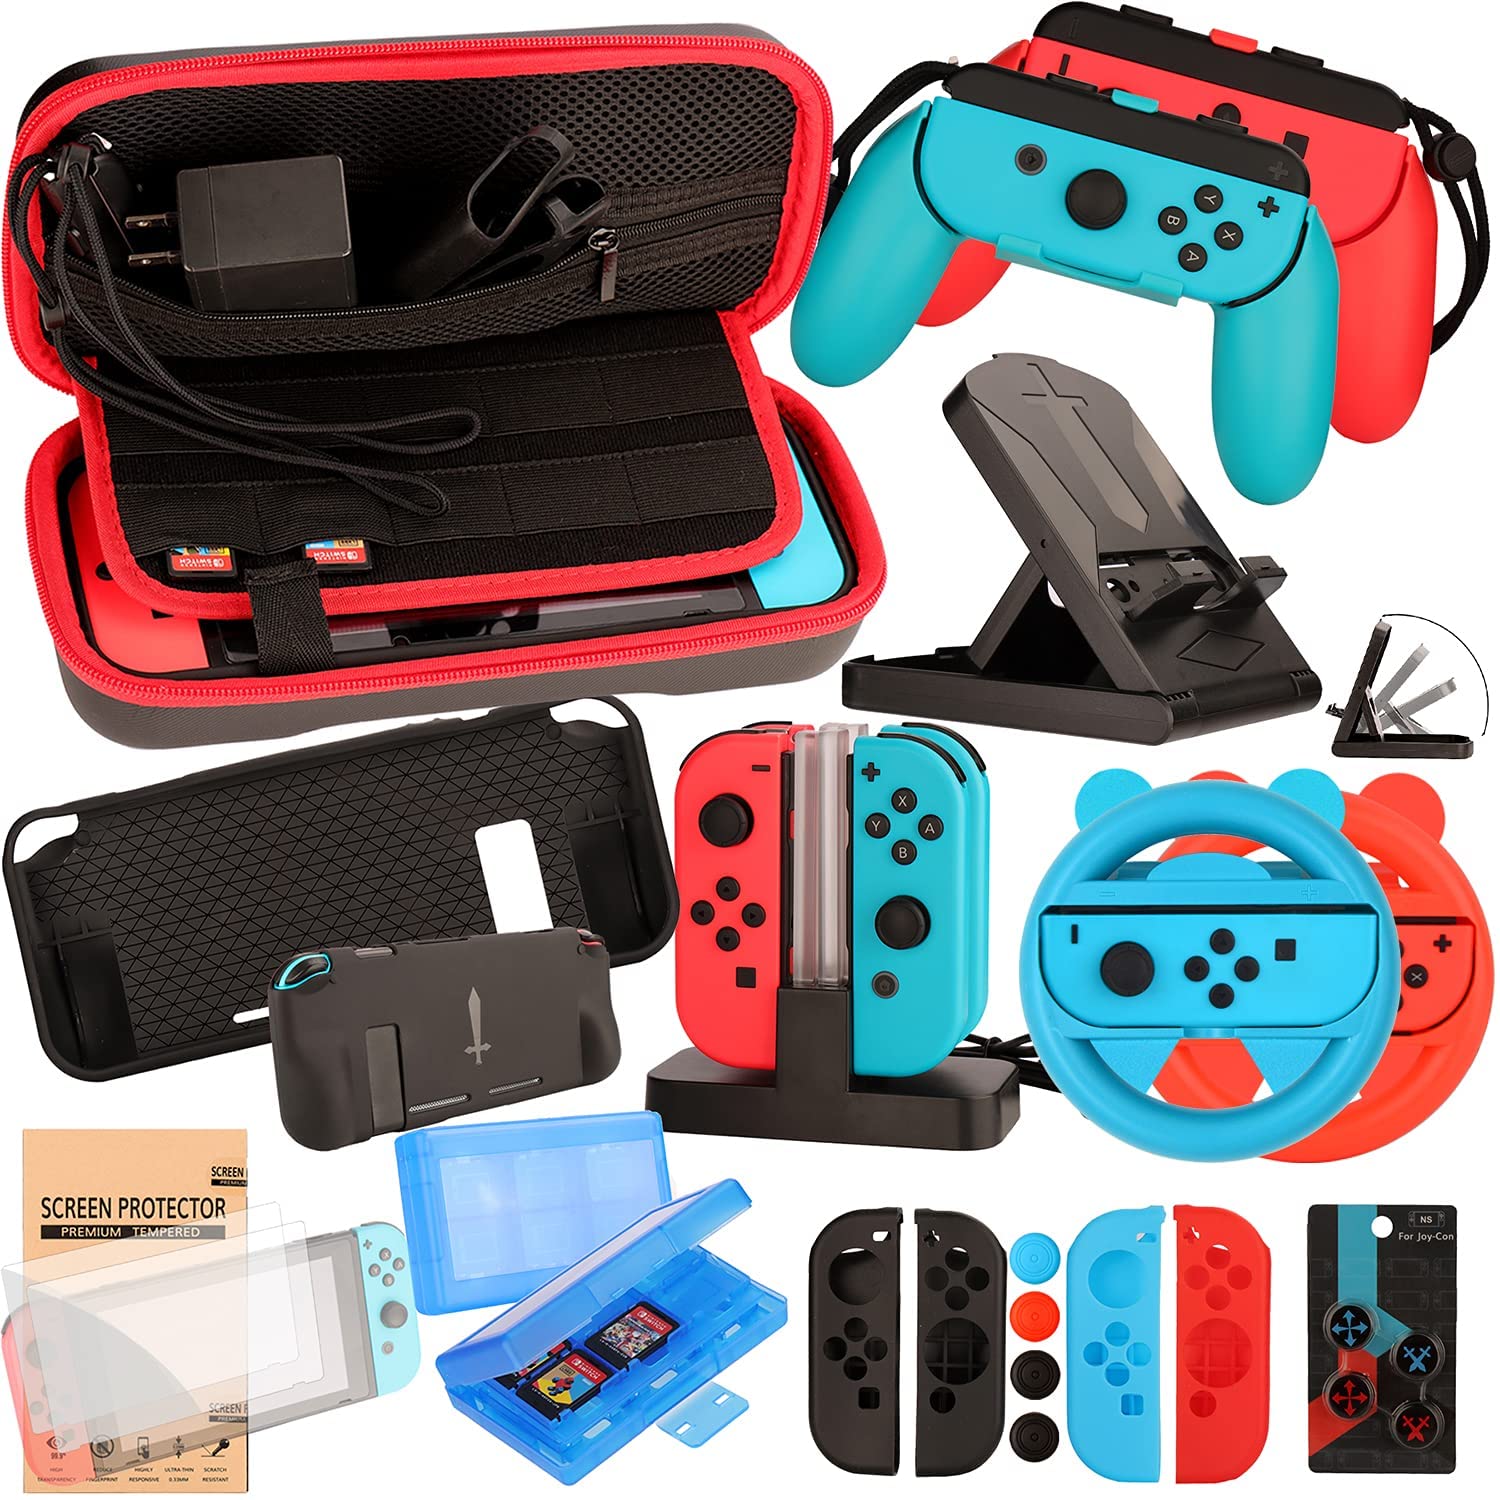 Accessories Kit for Nintendo Switch